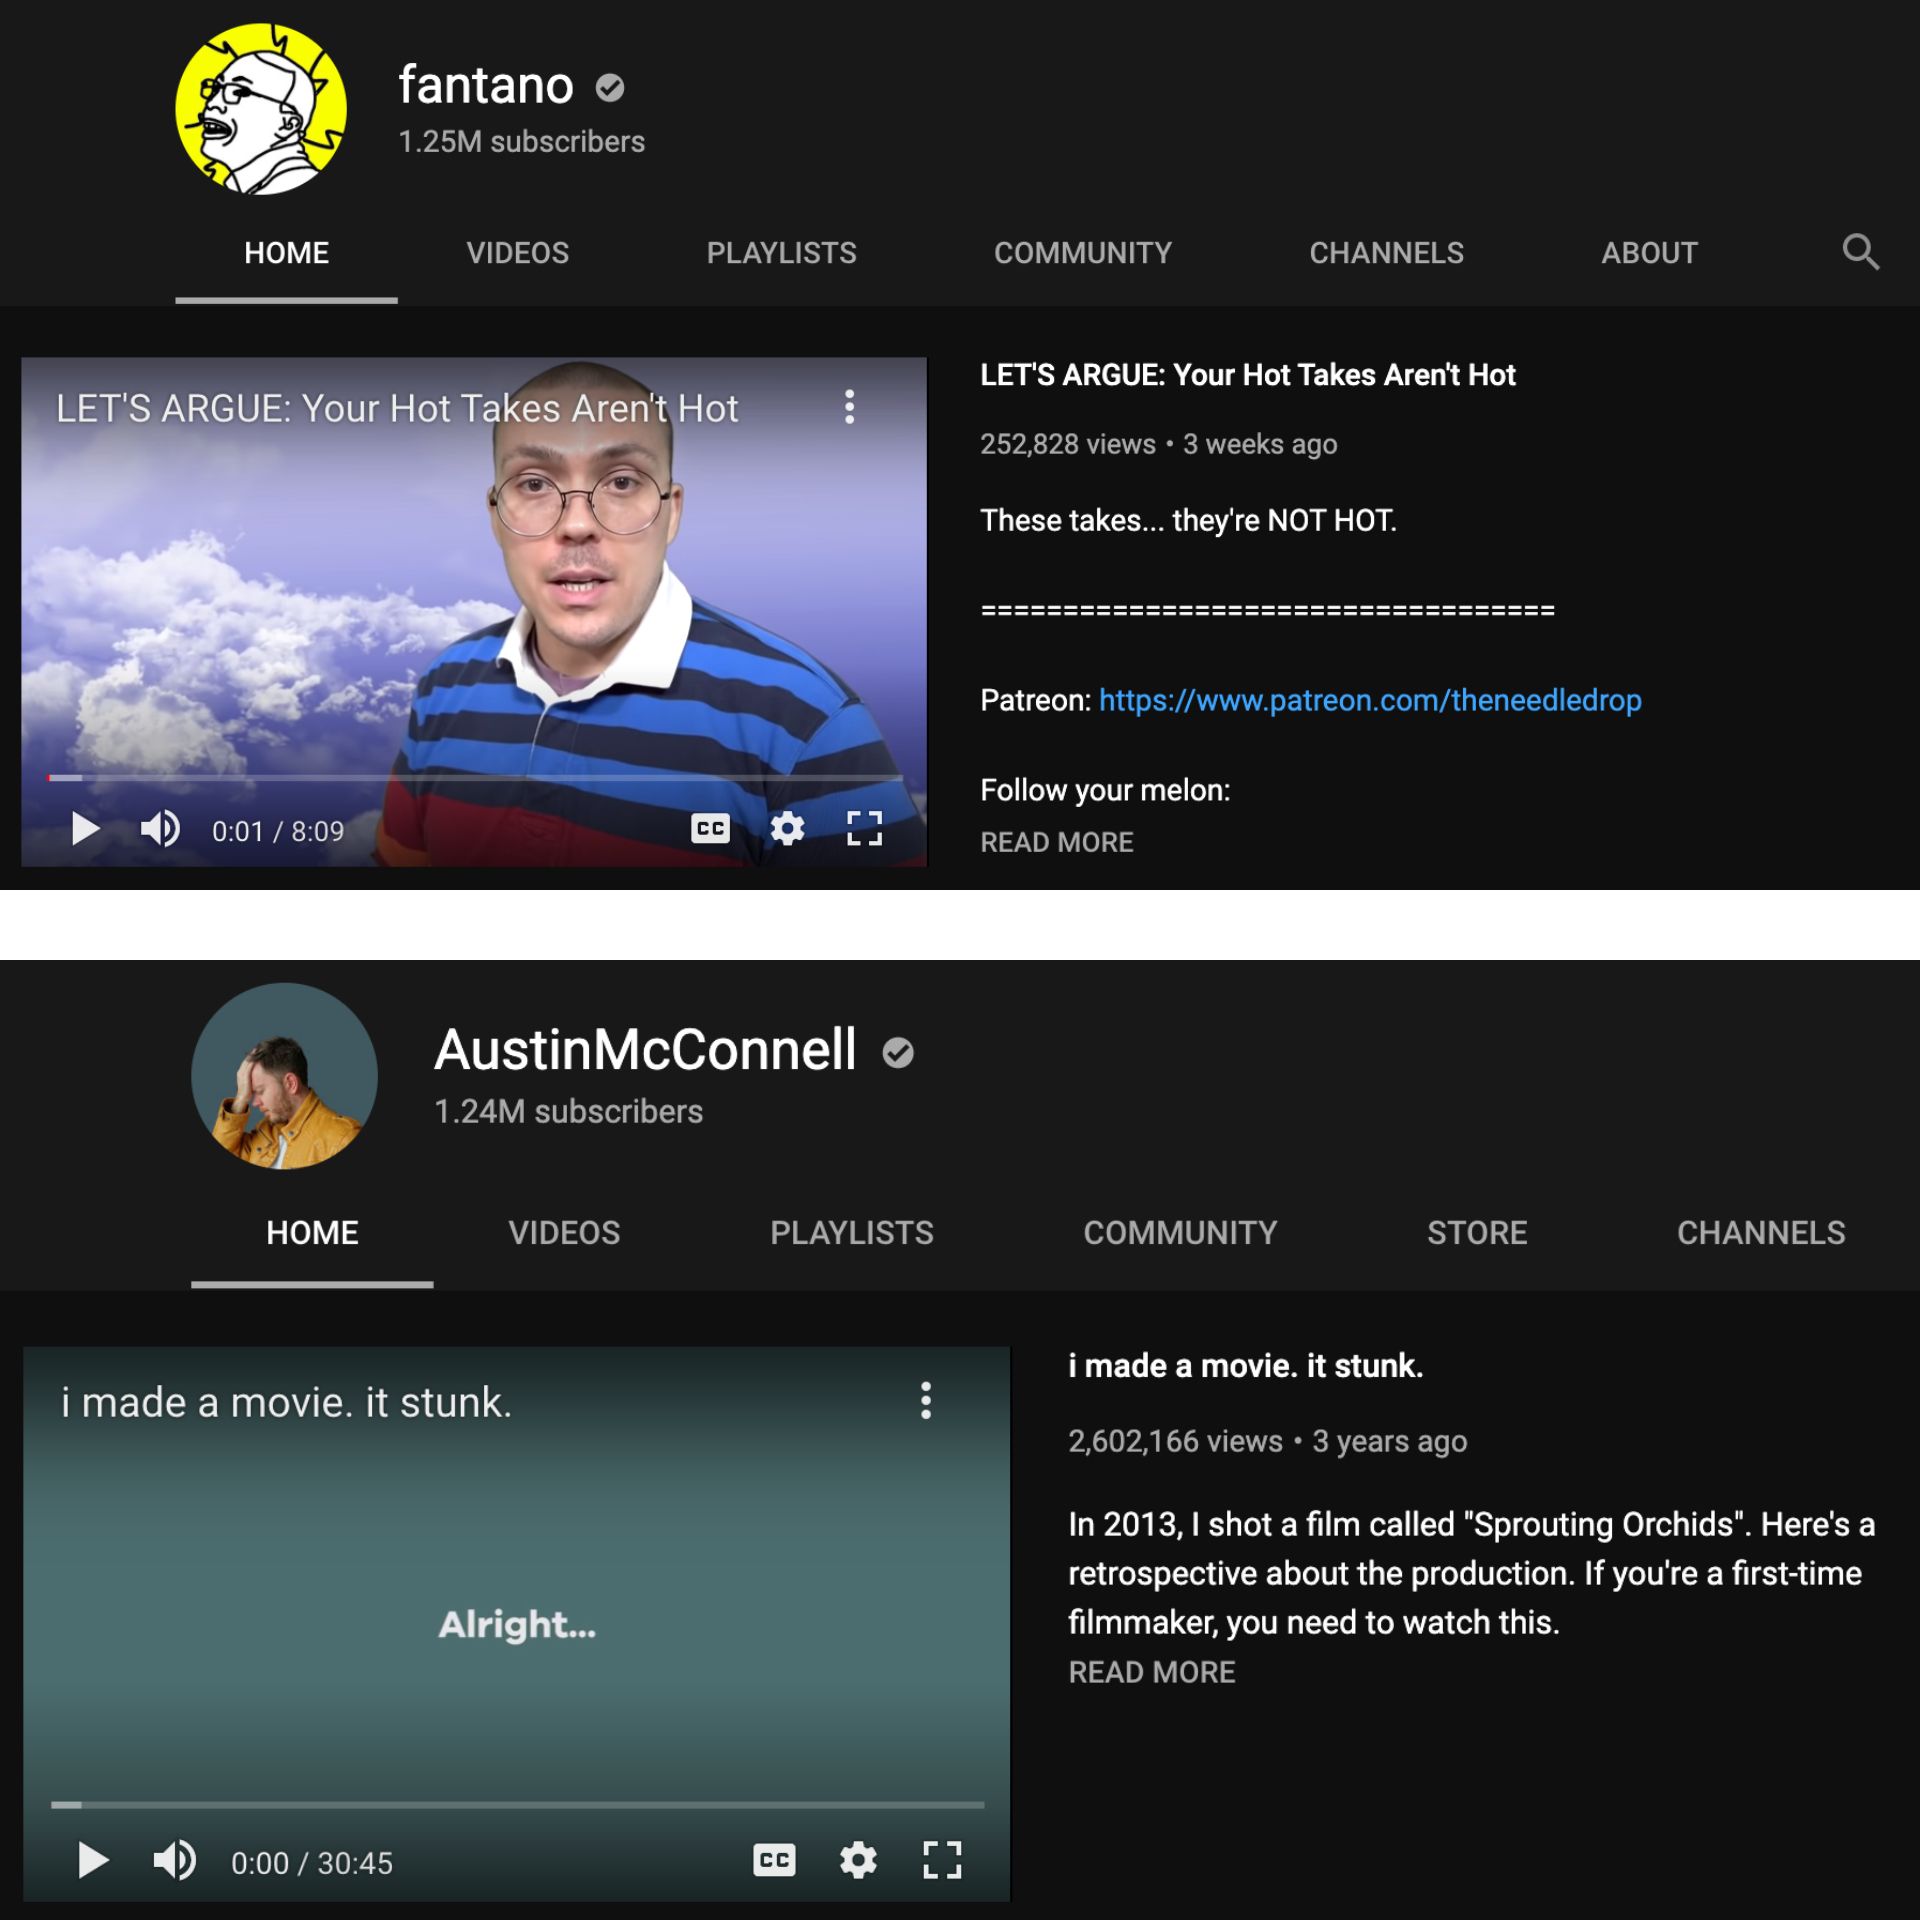 Screenshots of the channel trailers from Anthony Fantano and Austin McConnell. 